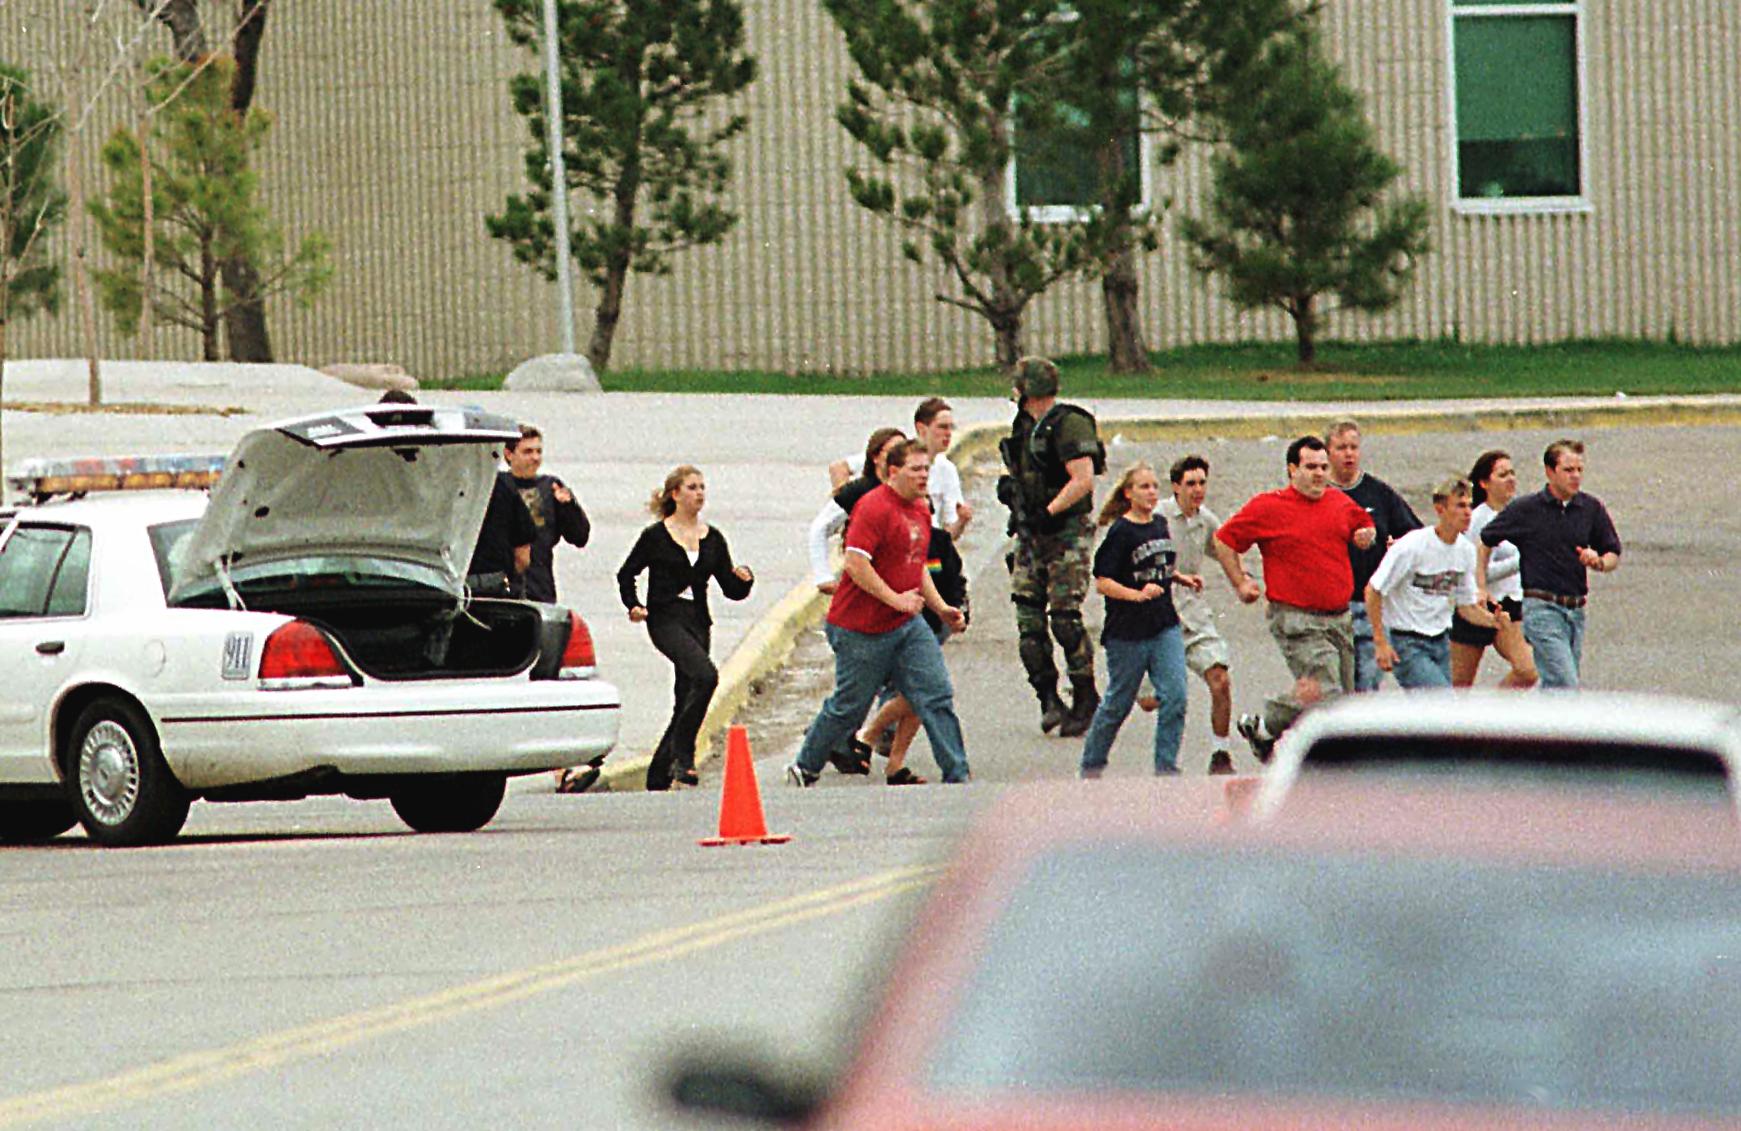 Students run from Columbine High School run under cover from police 20 April 1999 in Littleton, Colorado